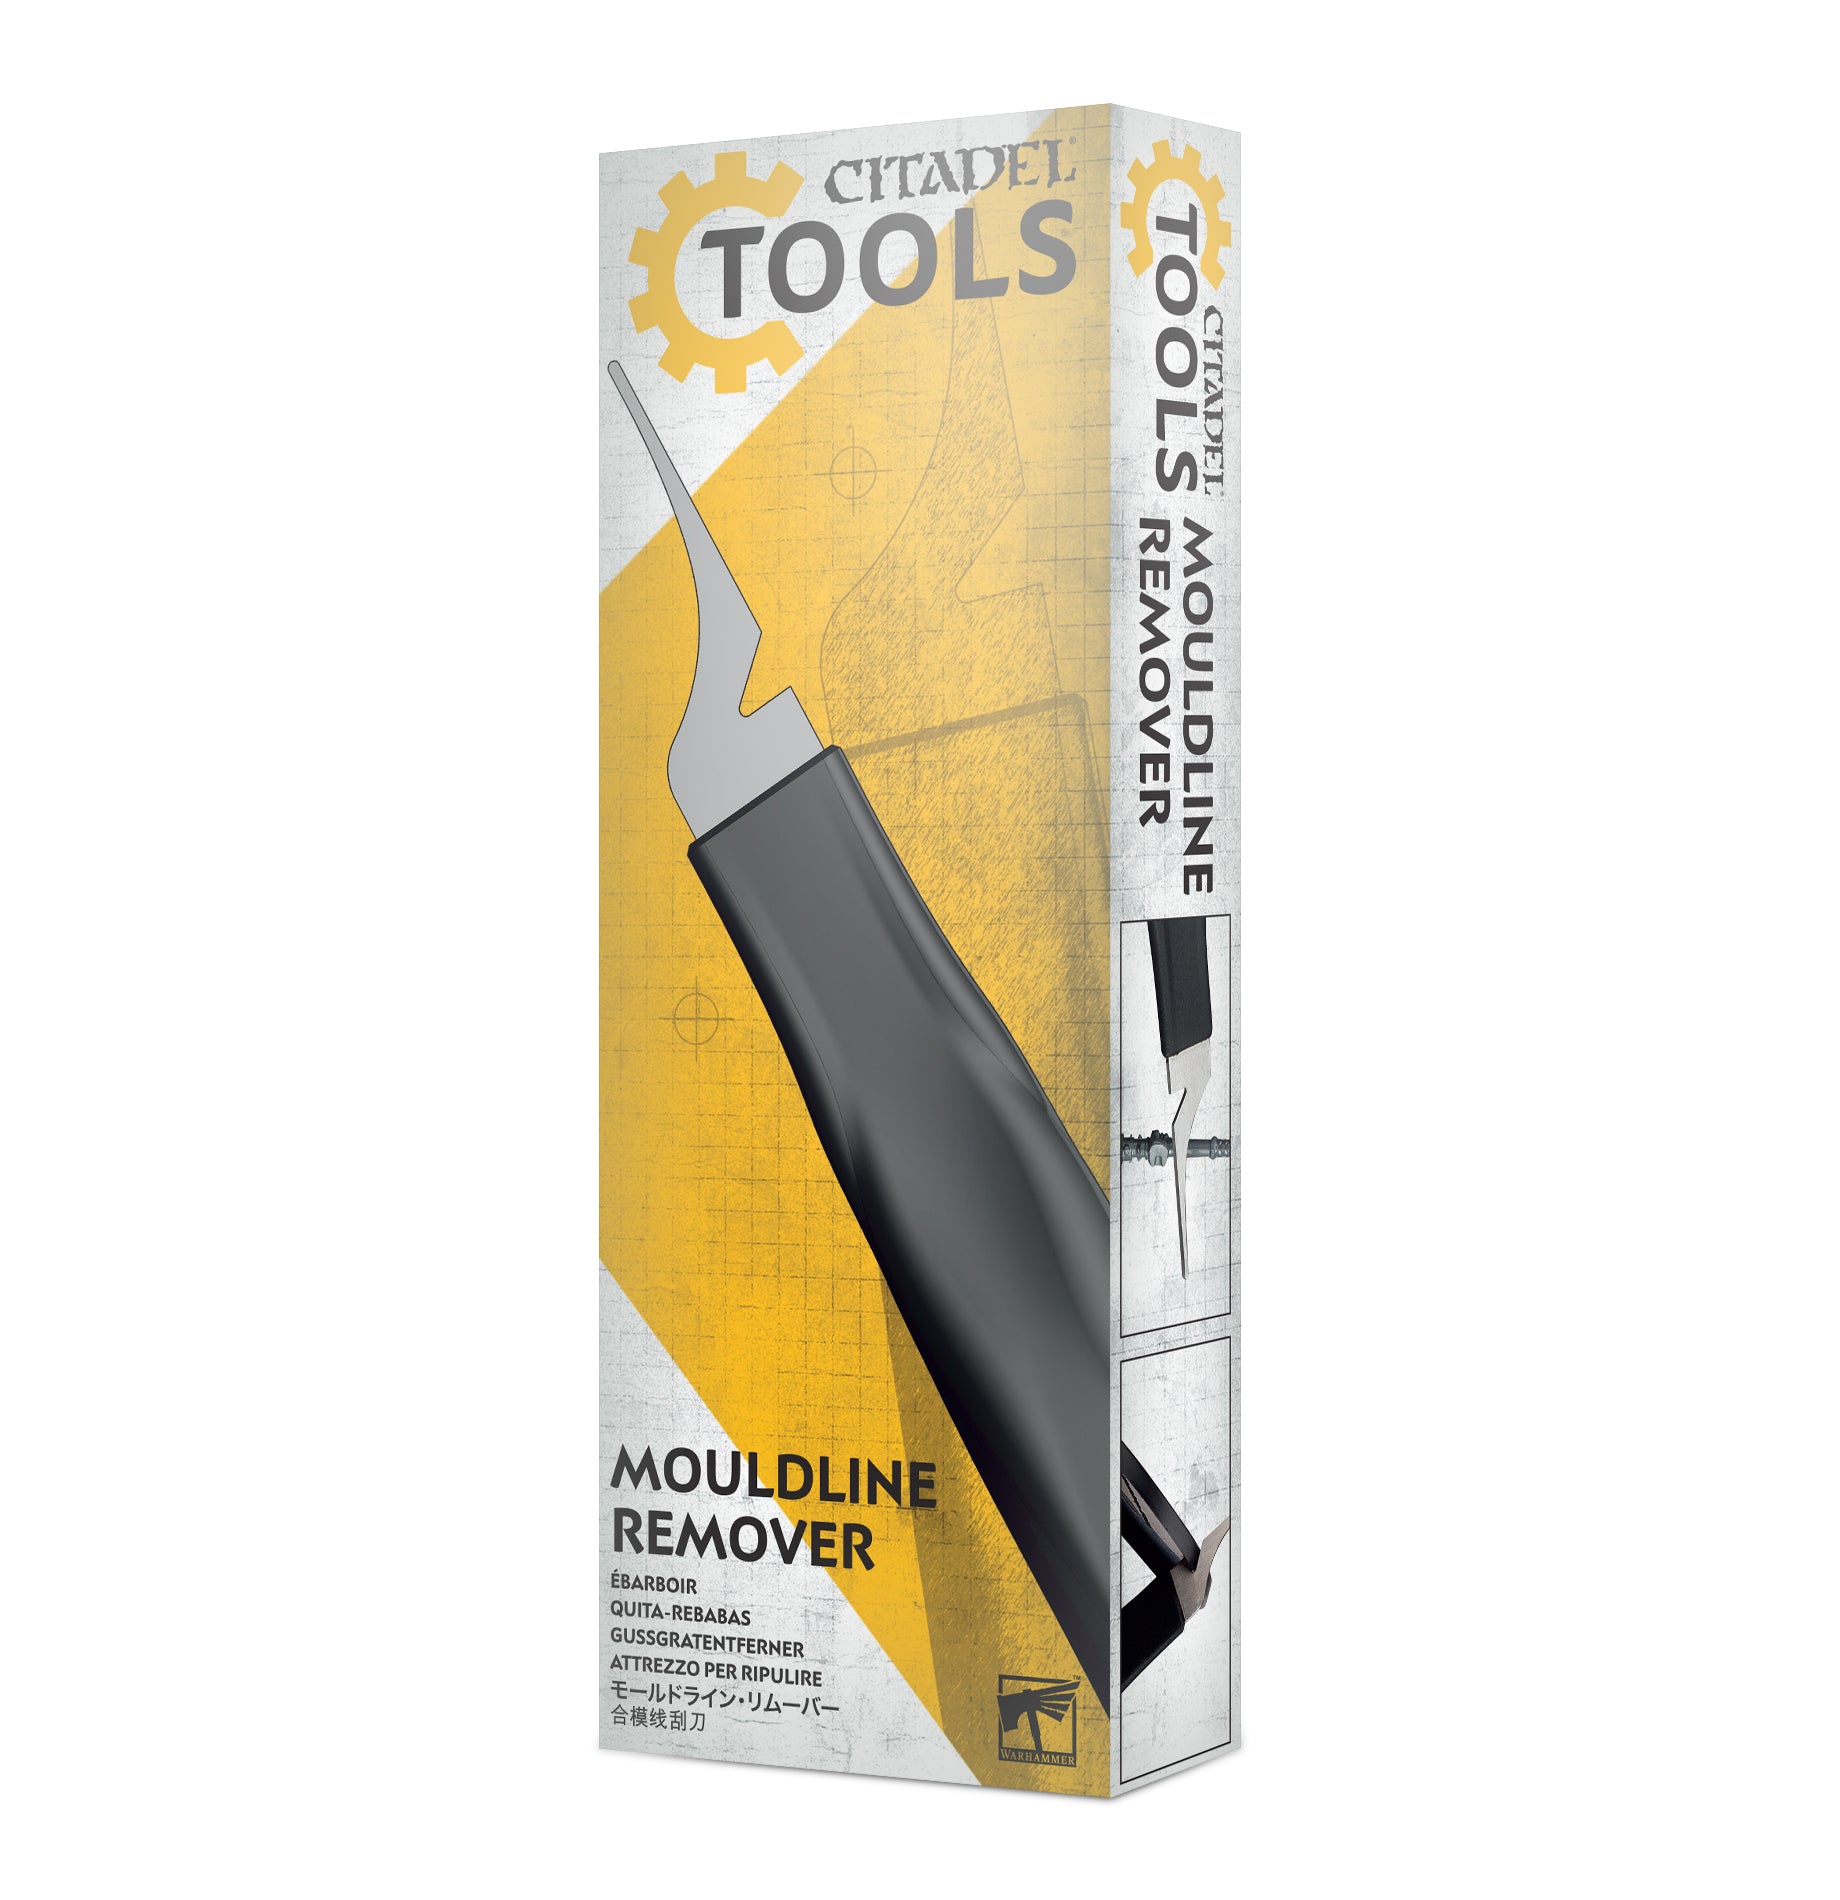 Citadel Tools: Mouldline Remover | Lots Moore NSW